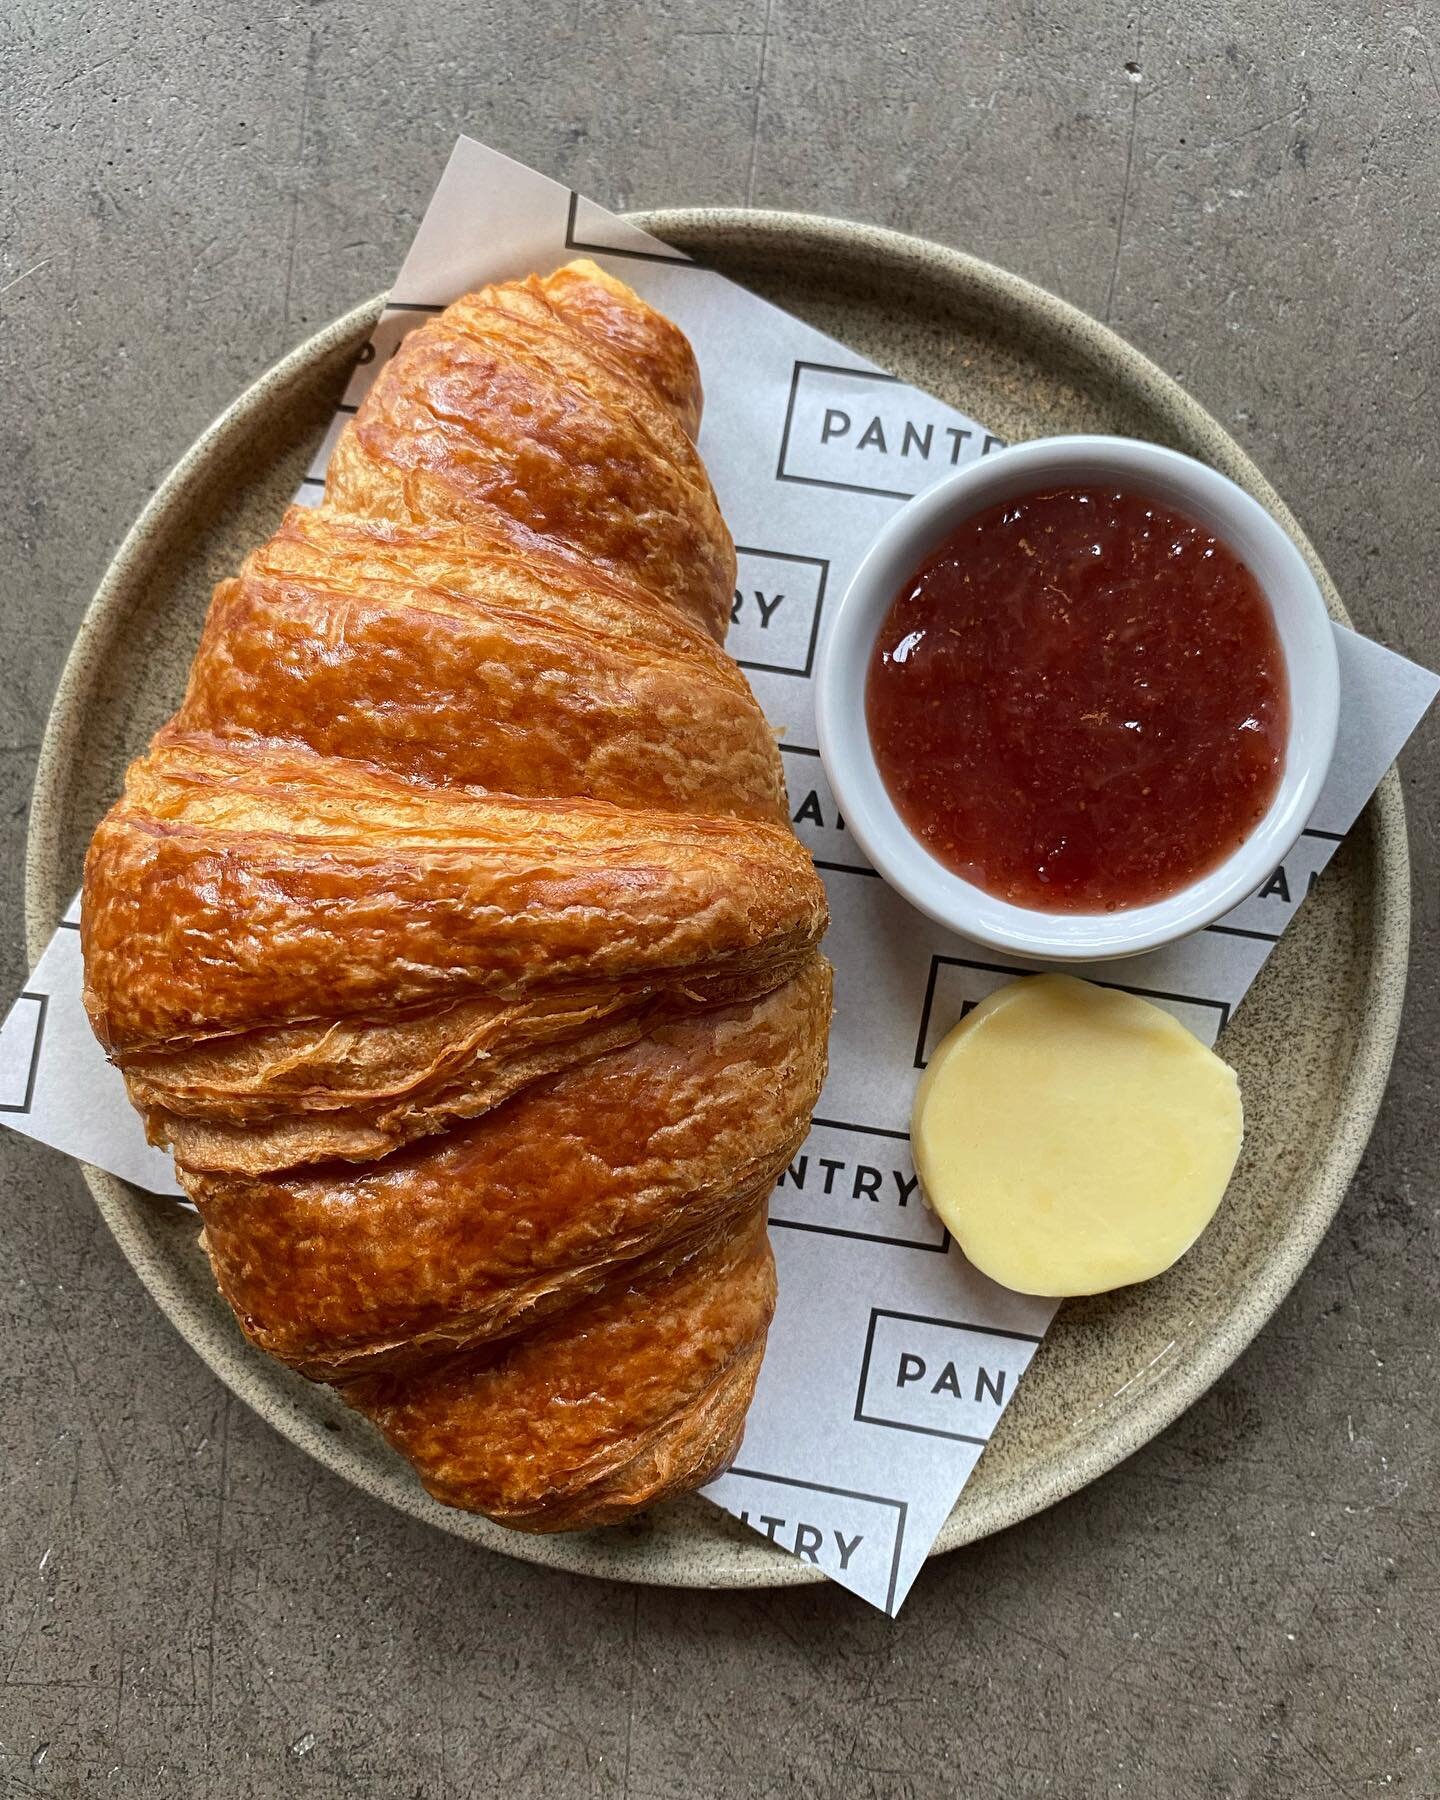 Morning!

@lockdownbakehouselondon croissant with @singlevarietyco strawberry I&rsquo;m + @theestatedairy butter?

Now available for sit in
.
.
.
.
.
.
.
#croissant #breakfast #breakfasttime #se23 #se23life #foresthill #foresthilllondon